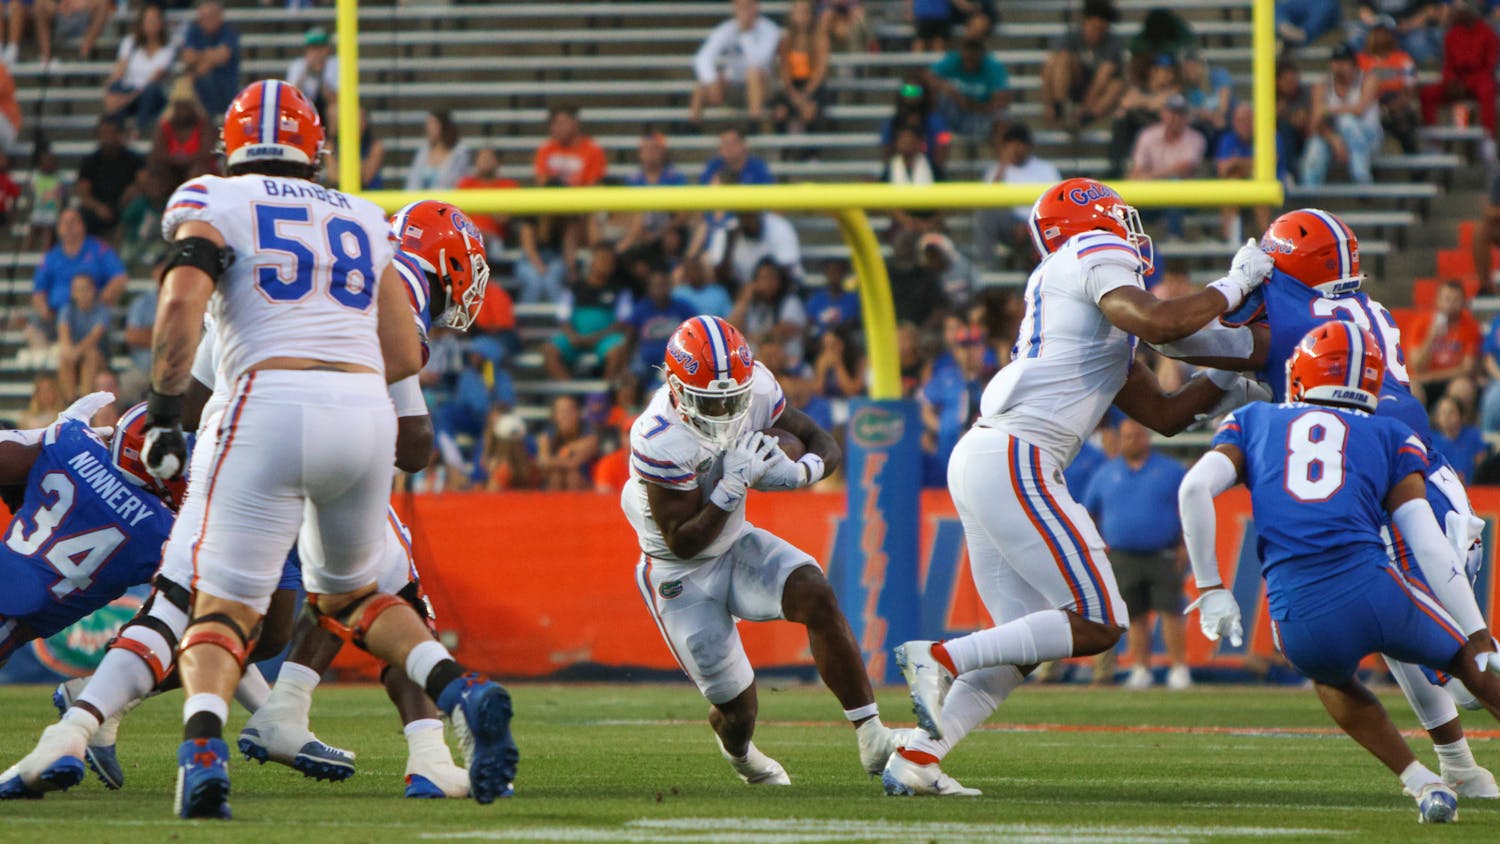 UF's freshmen and transfer portal signees made their debut in the Gators' Spring game.